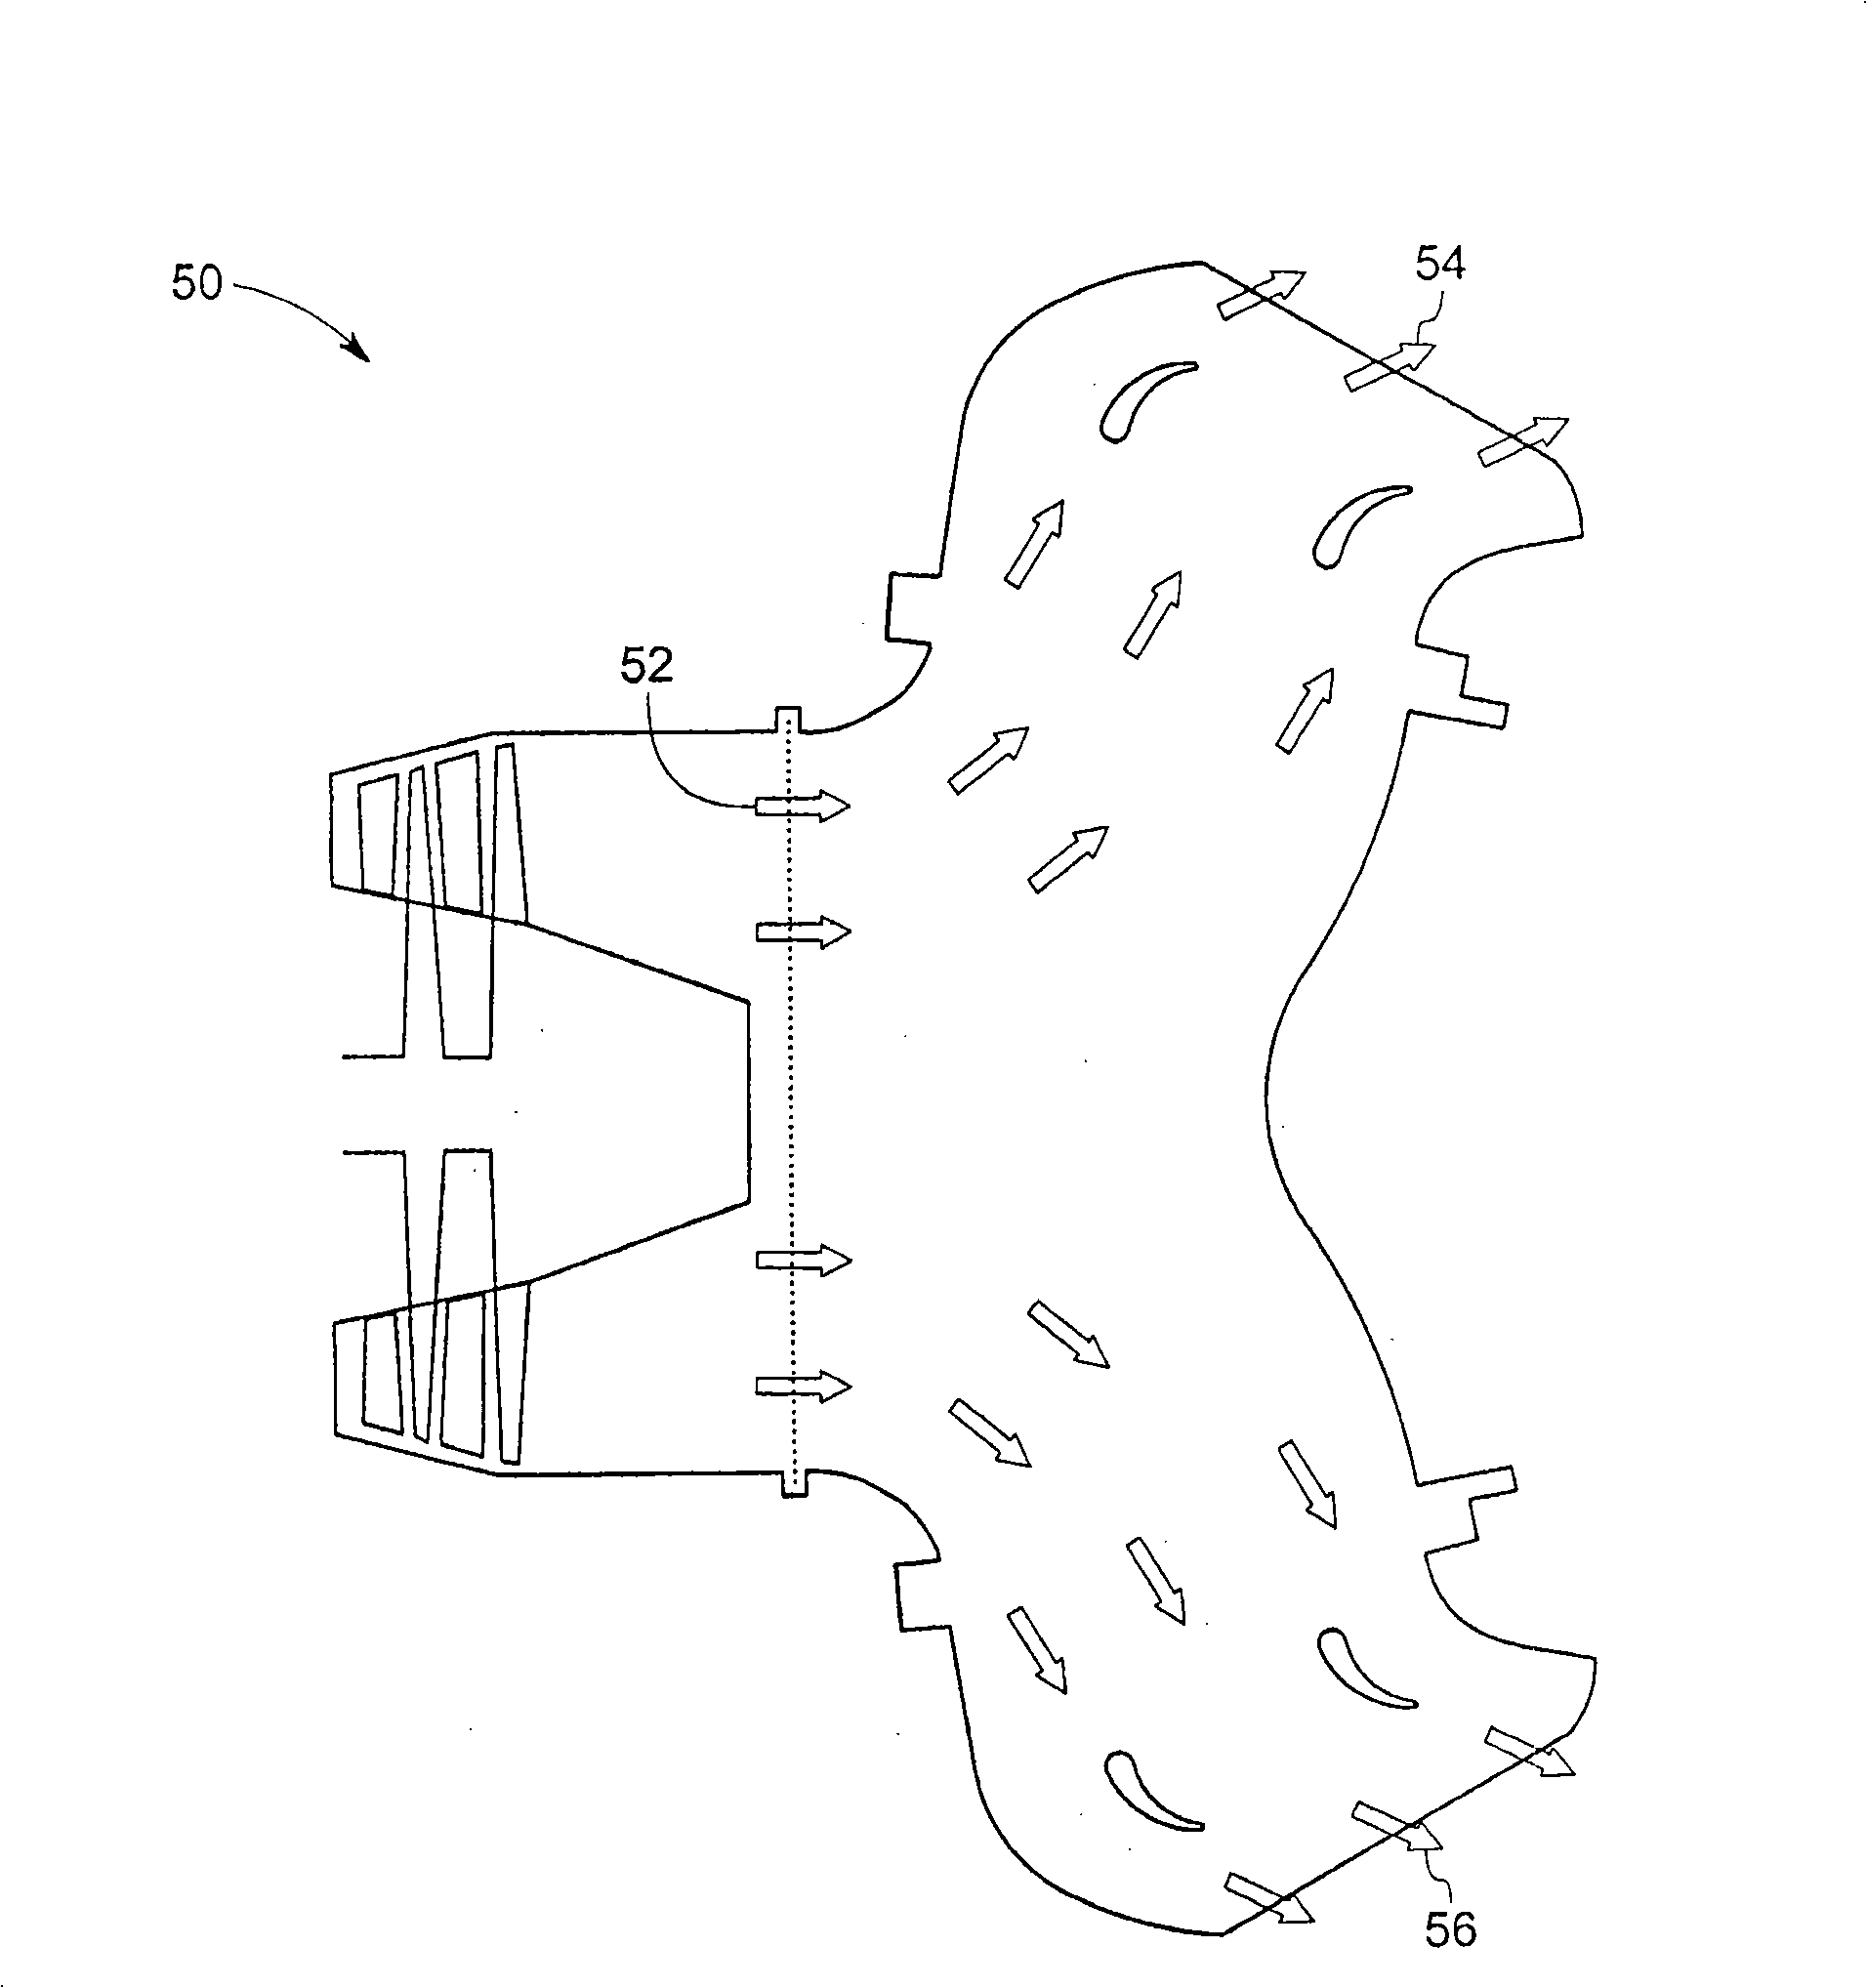 Thrust generator for a propulsion system